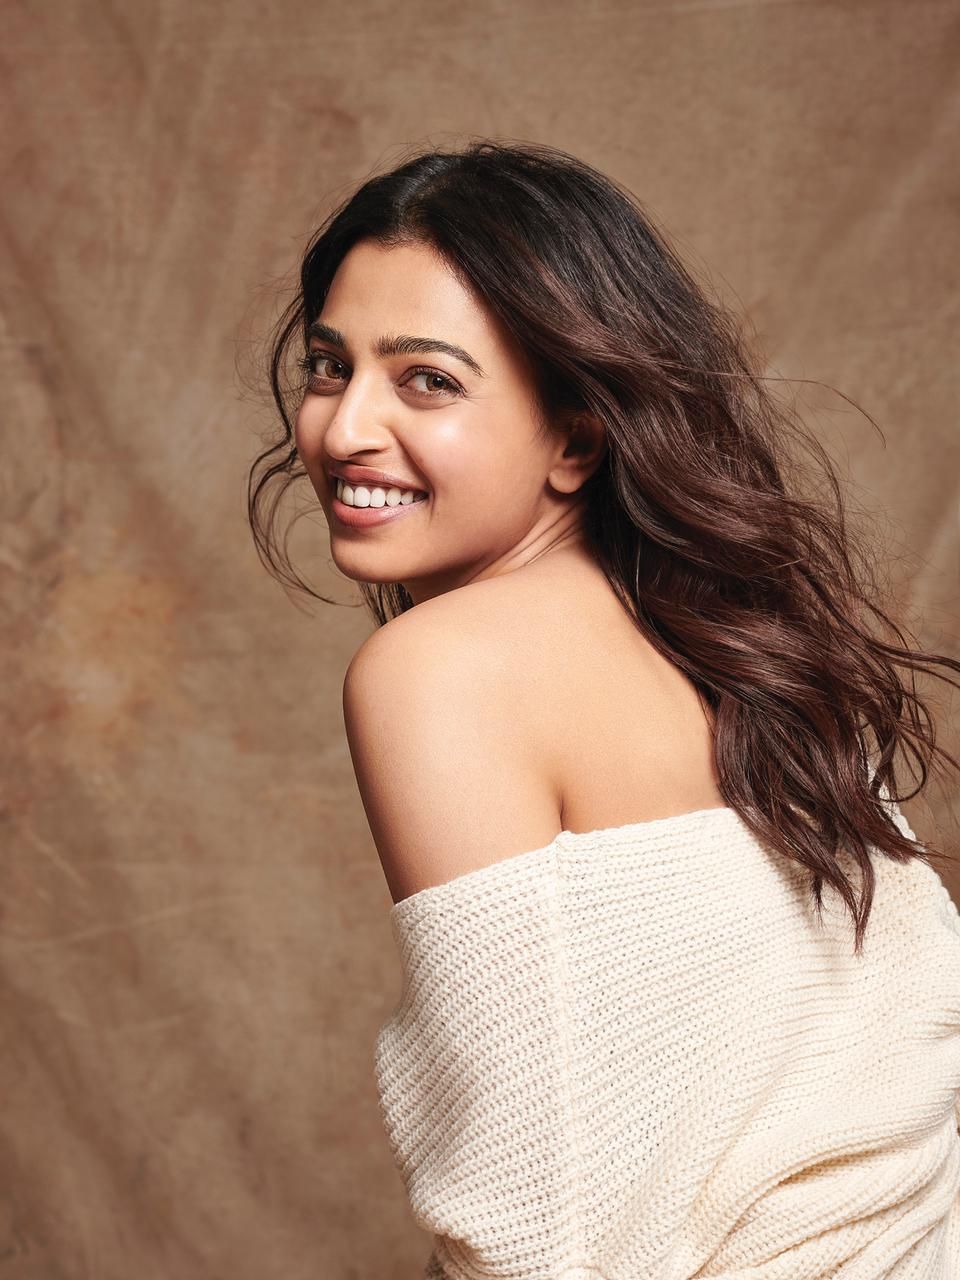 Radhika Apte Juggling Projects Like A Pro, Promotes Her Web Series In Between A Hectic Shoot Schedule